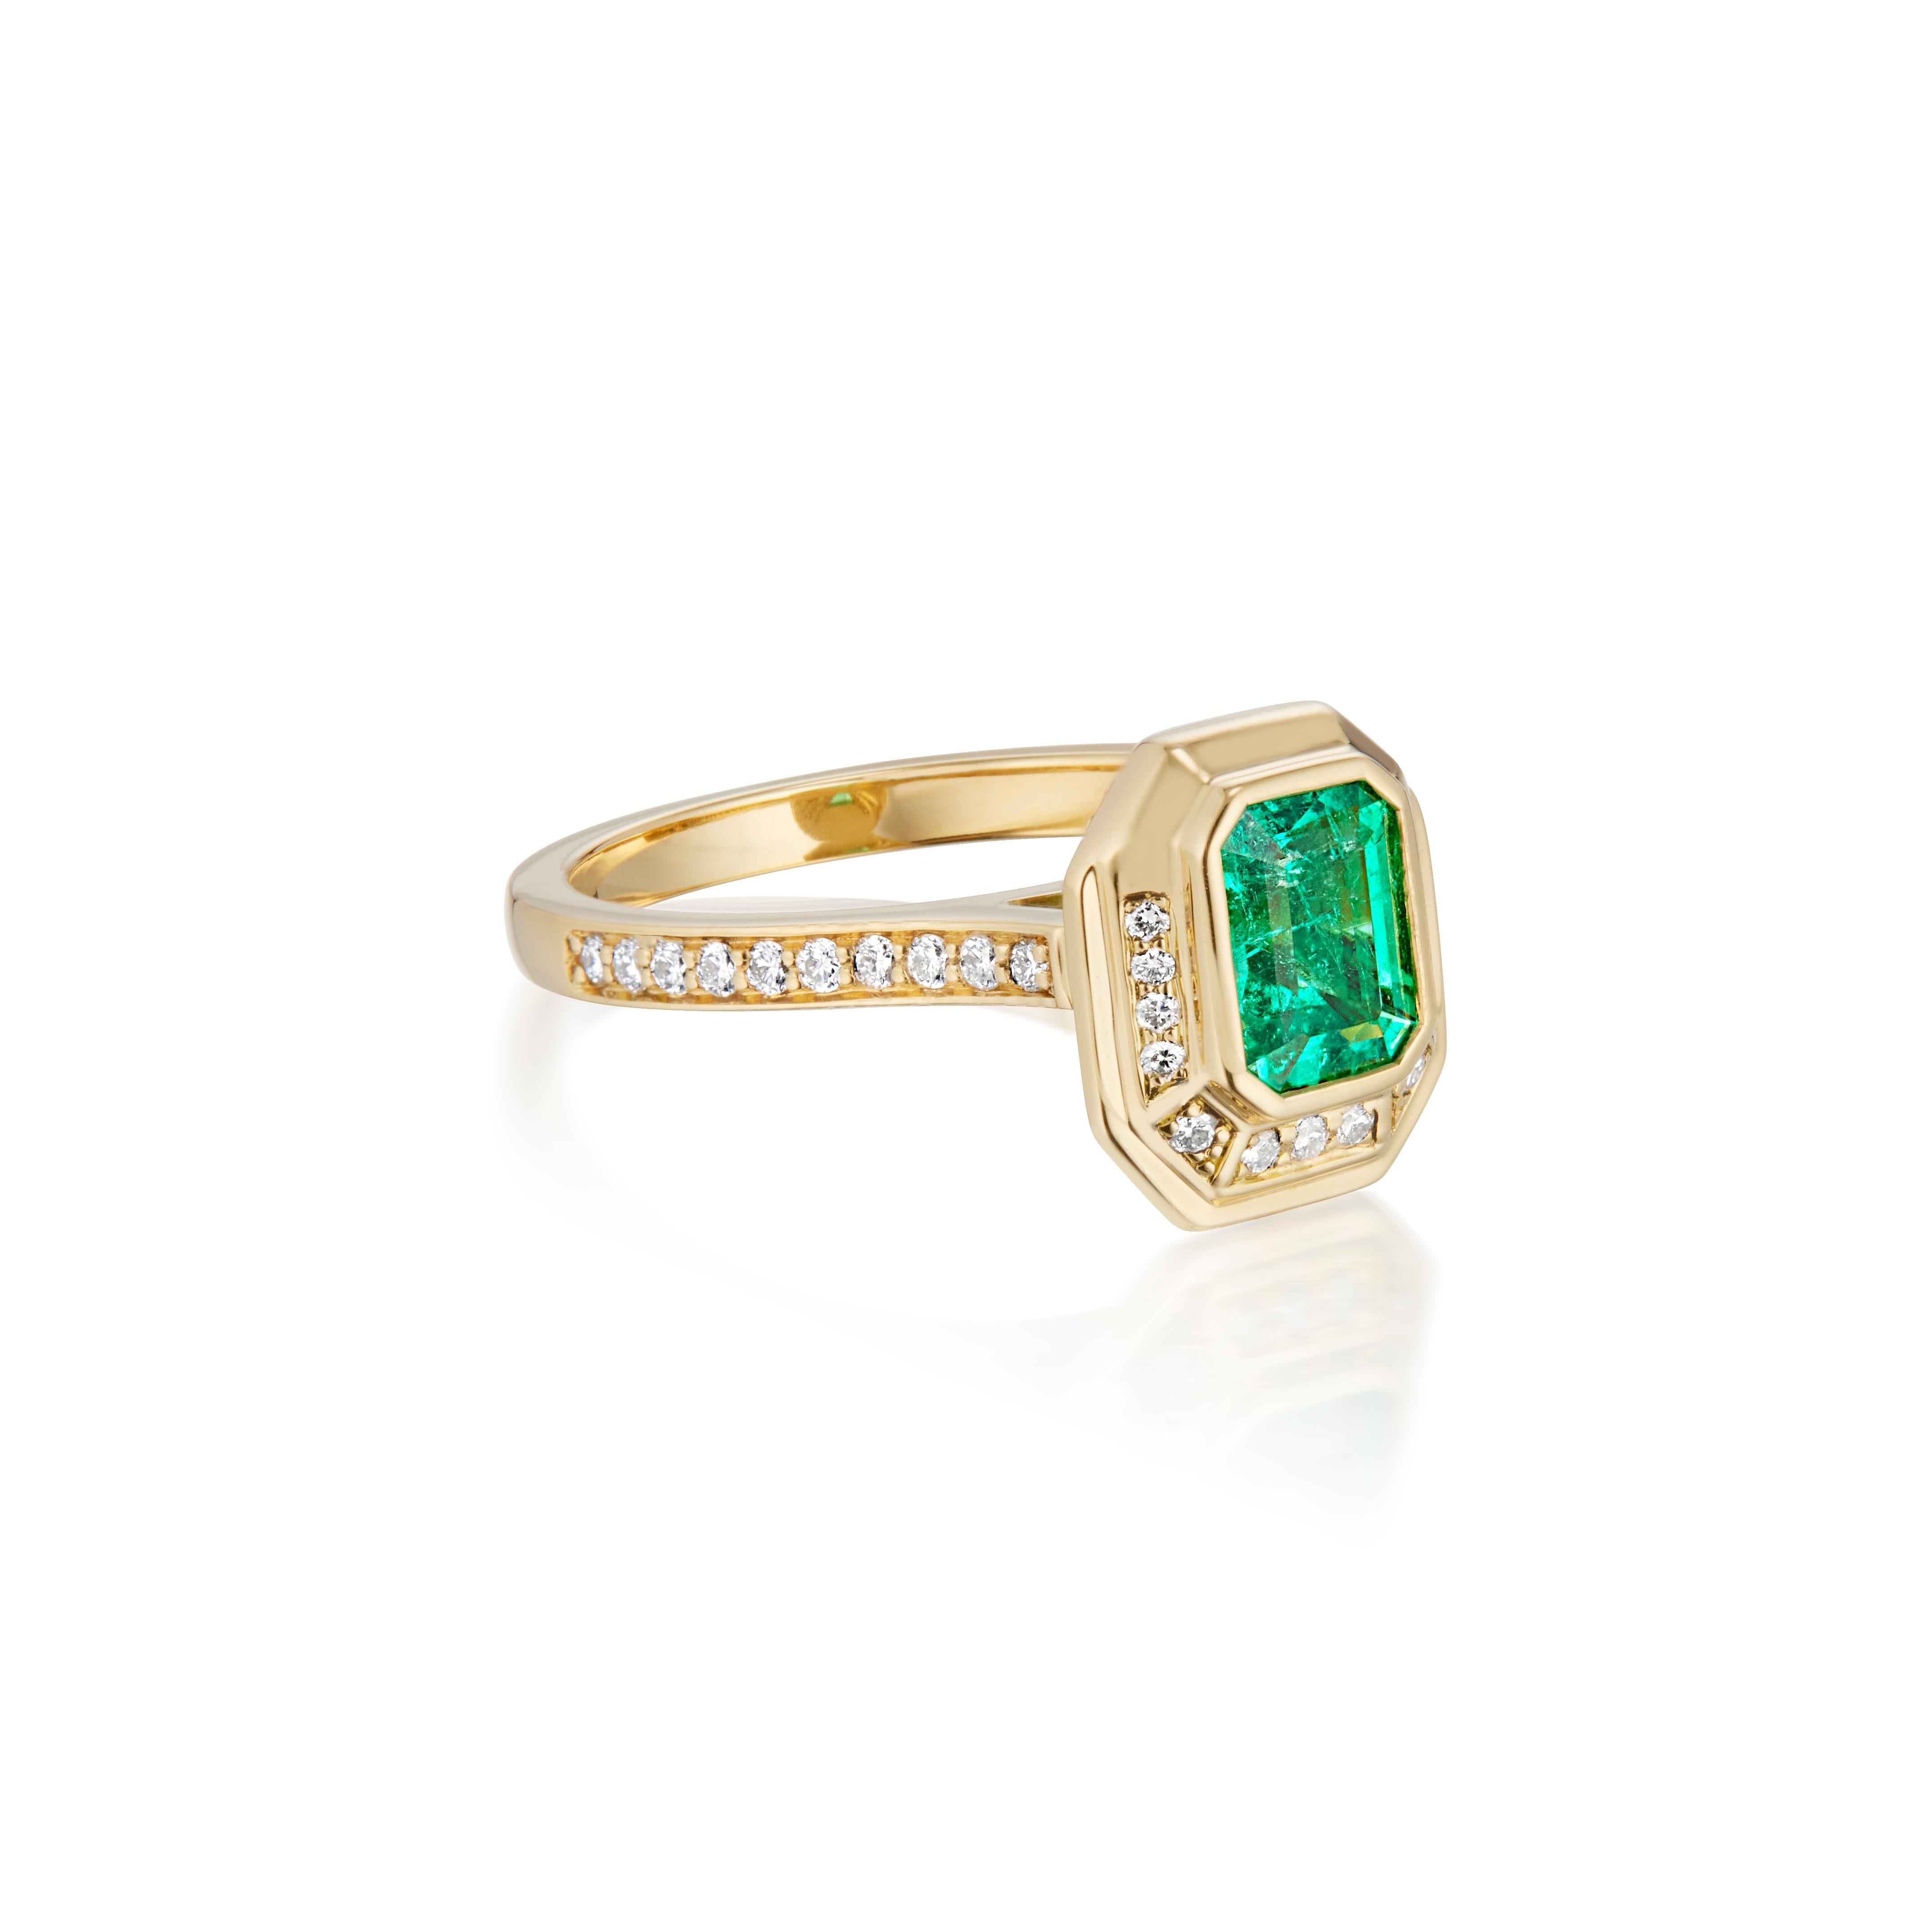 - 18ct Yellow Gold Approx 5.5gms
- 40 x Round Brilliant Cut Diamonds F-VS 0.35ct
- Emerald Cut Muzo Colombian Emerald 0.95ct
- Total Carat Weight 1.30ct
- Finger - Size  (6-1/4) 
- Shank 2mm wide 
- Top Table 12mm x 10mm

This 18k yellow gold